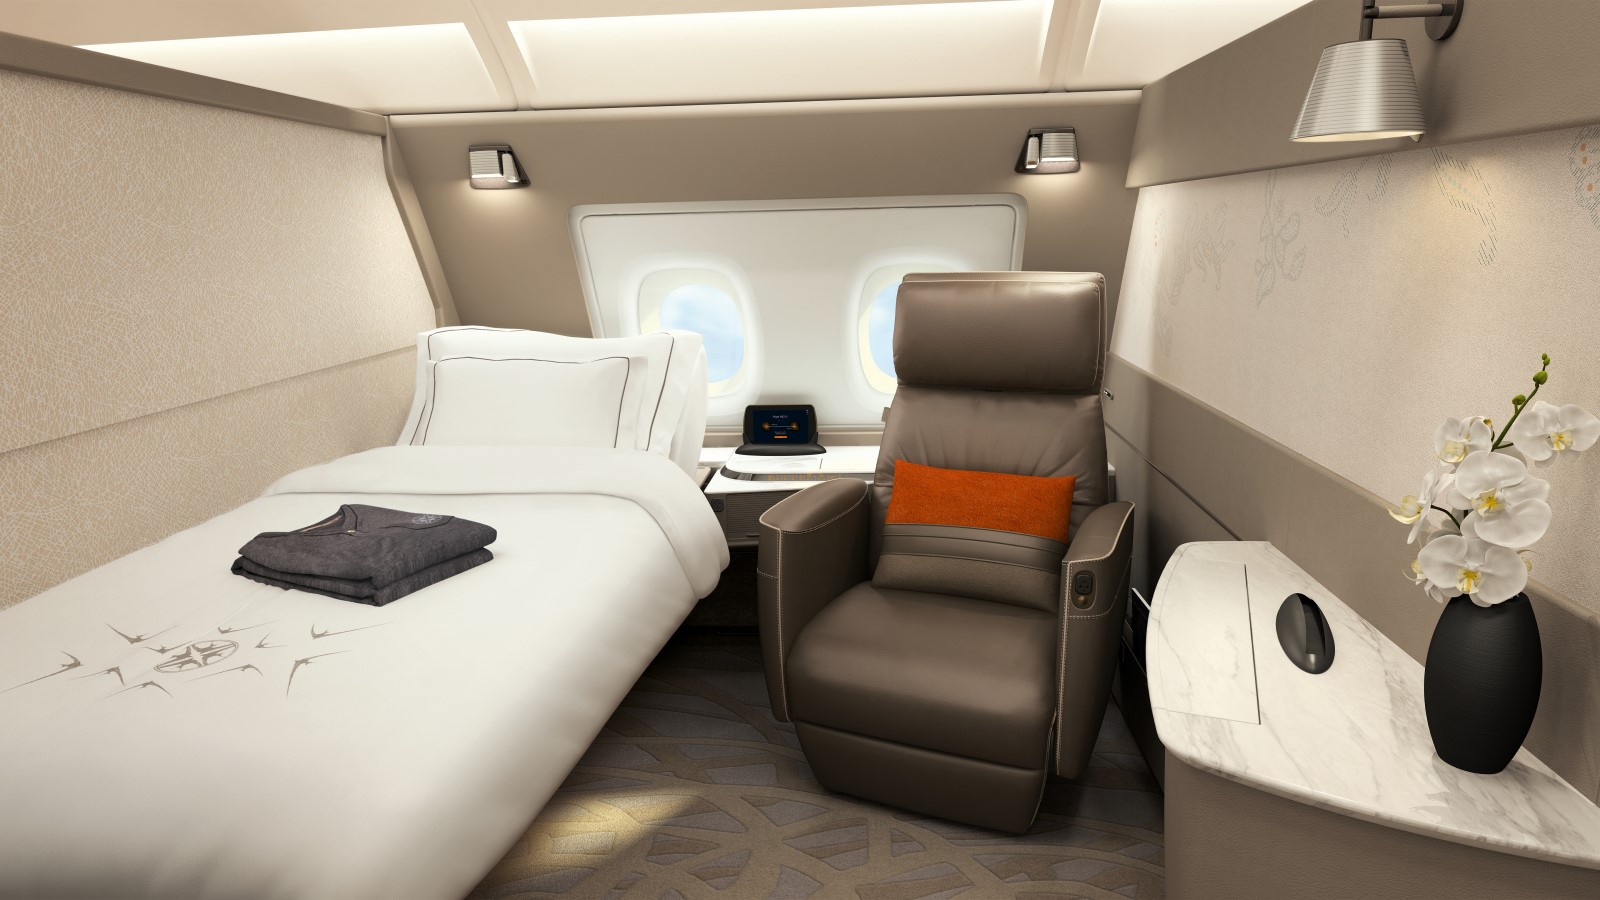 Singapore Airlines' latest Suites experience